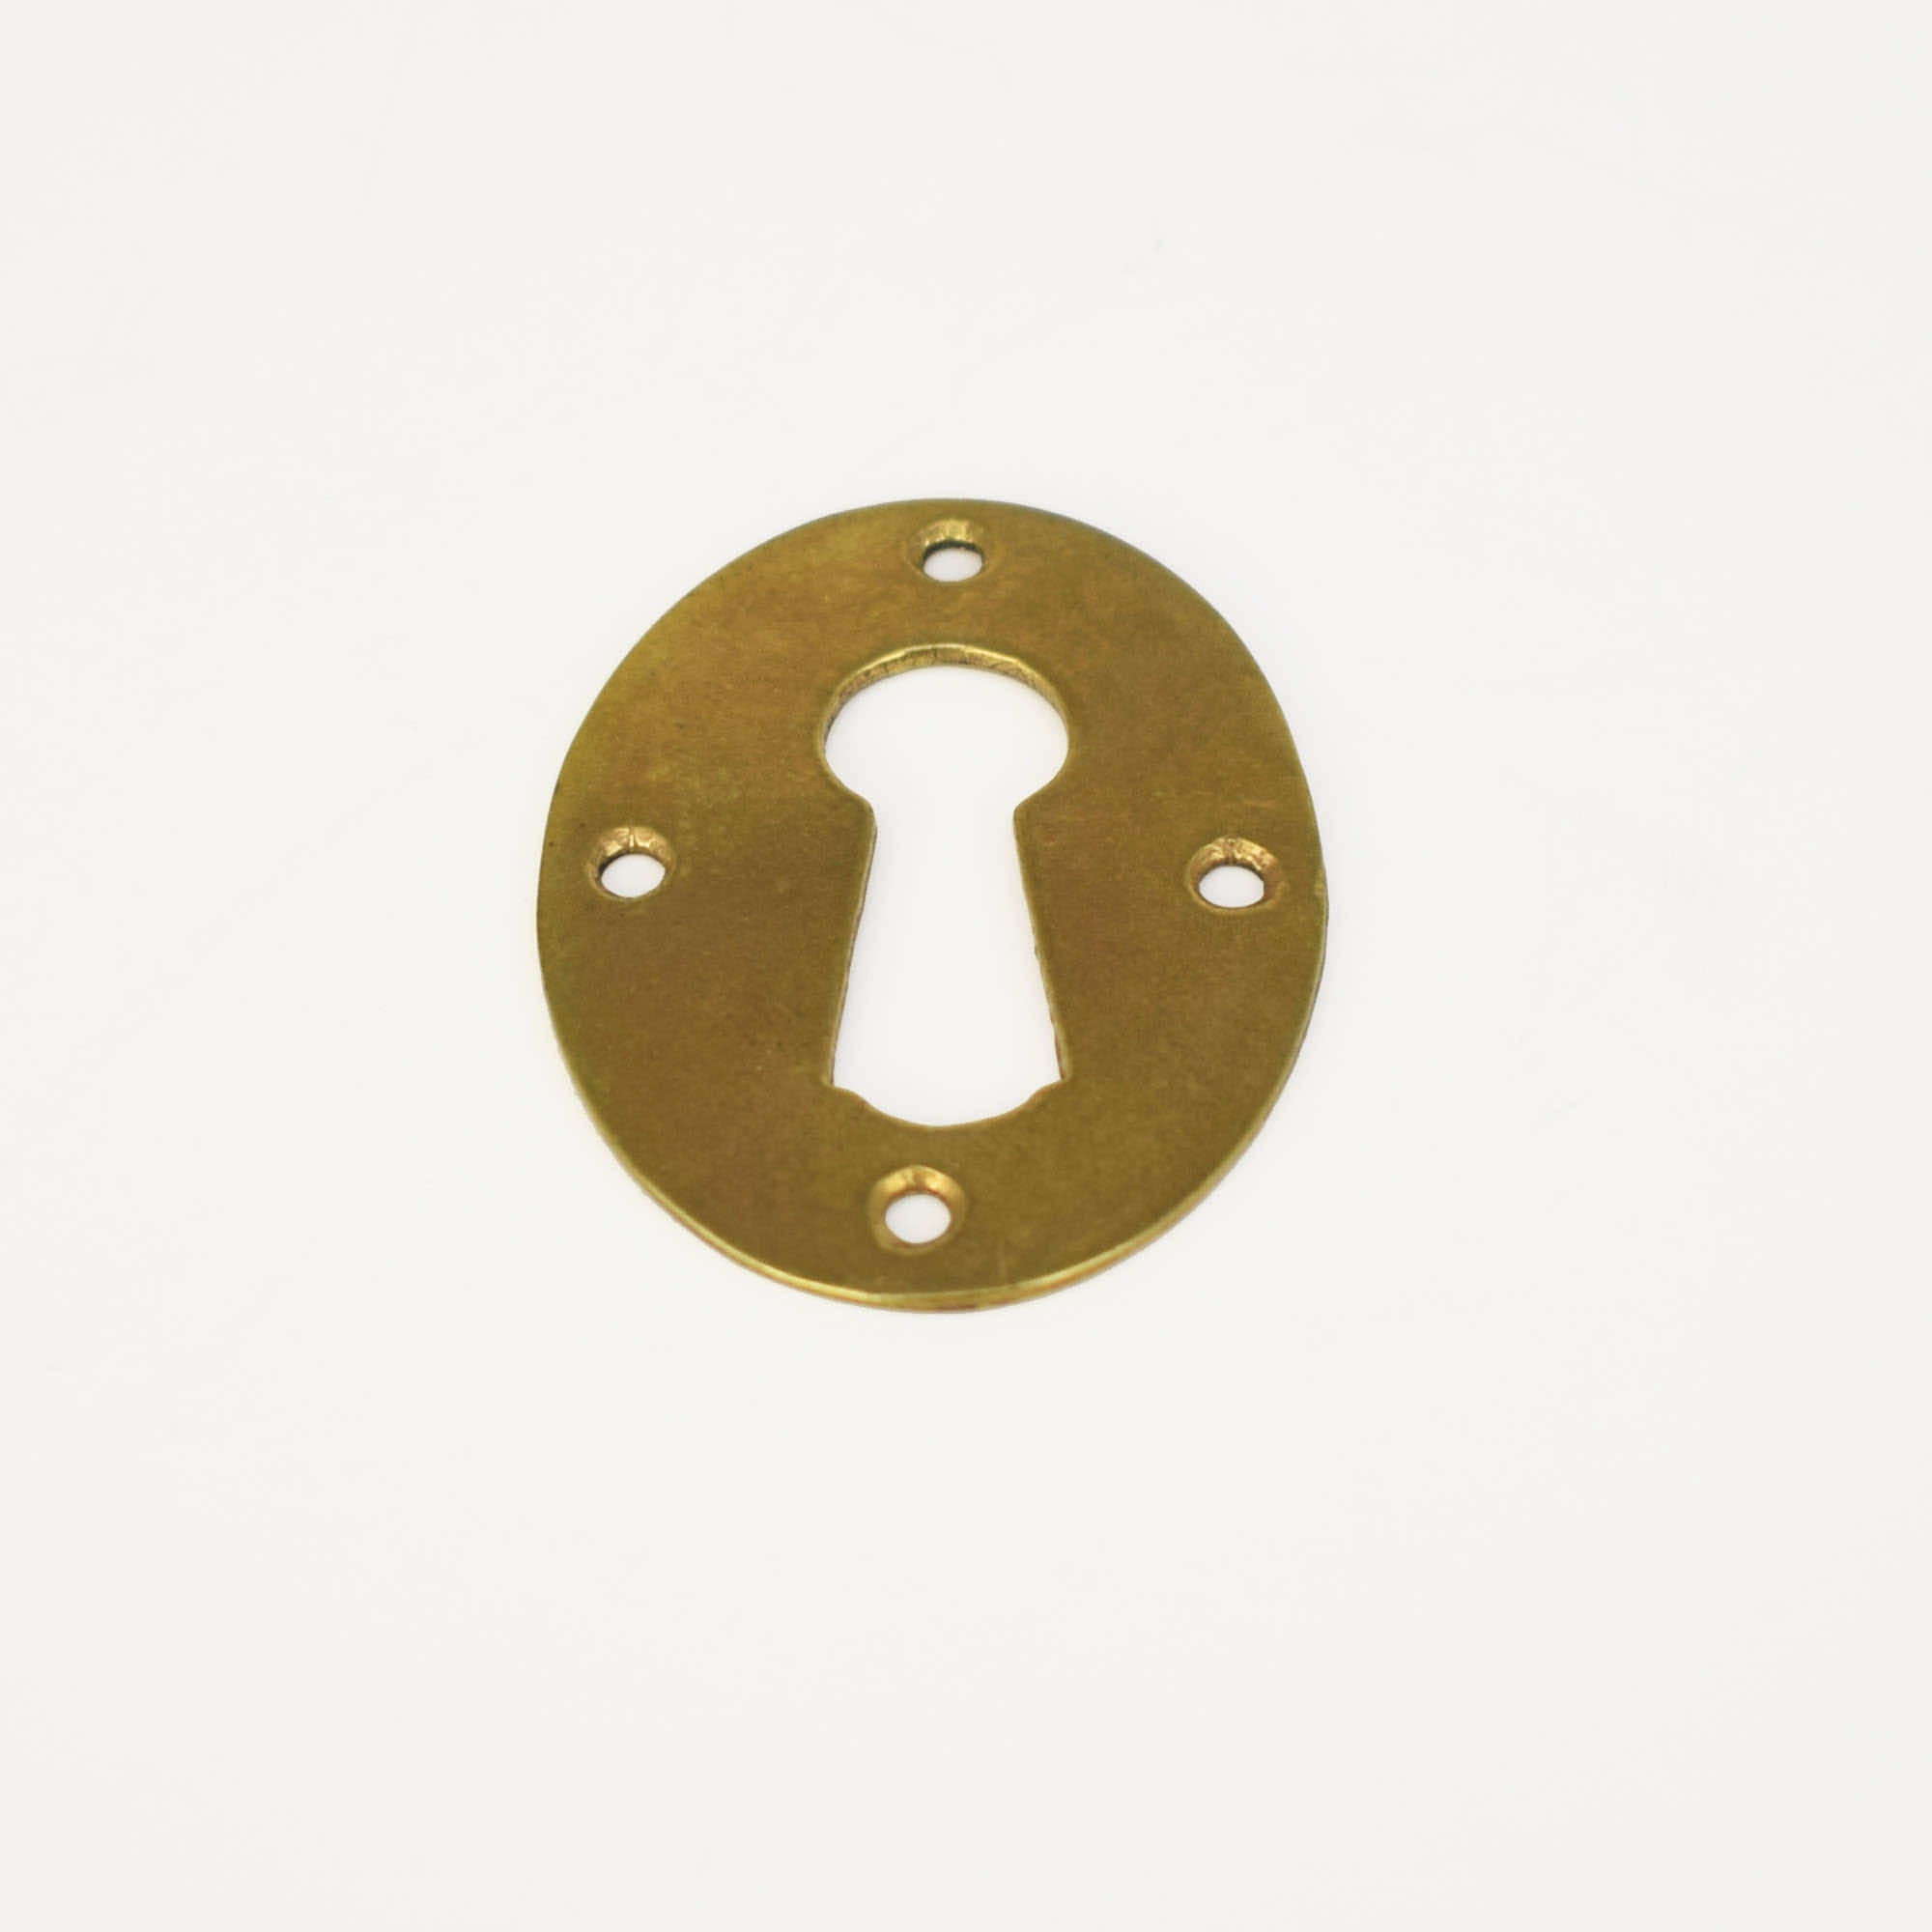 Classic Keyhole Plate, Finish Satin Bronze, Material Brass, Screw/Nail  135140-xxx (Not Included), Projection - Overall Dimensions 176 mm - HANDYCT